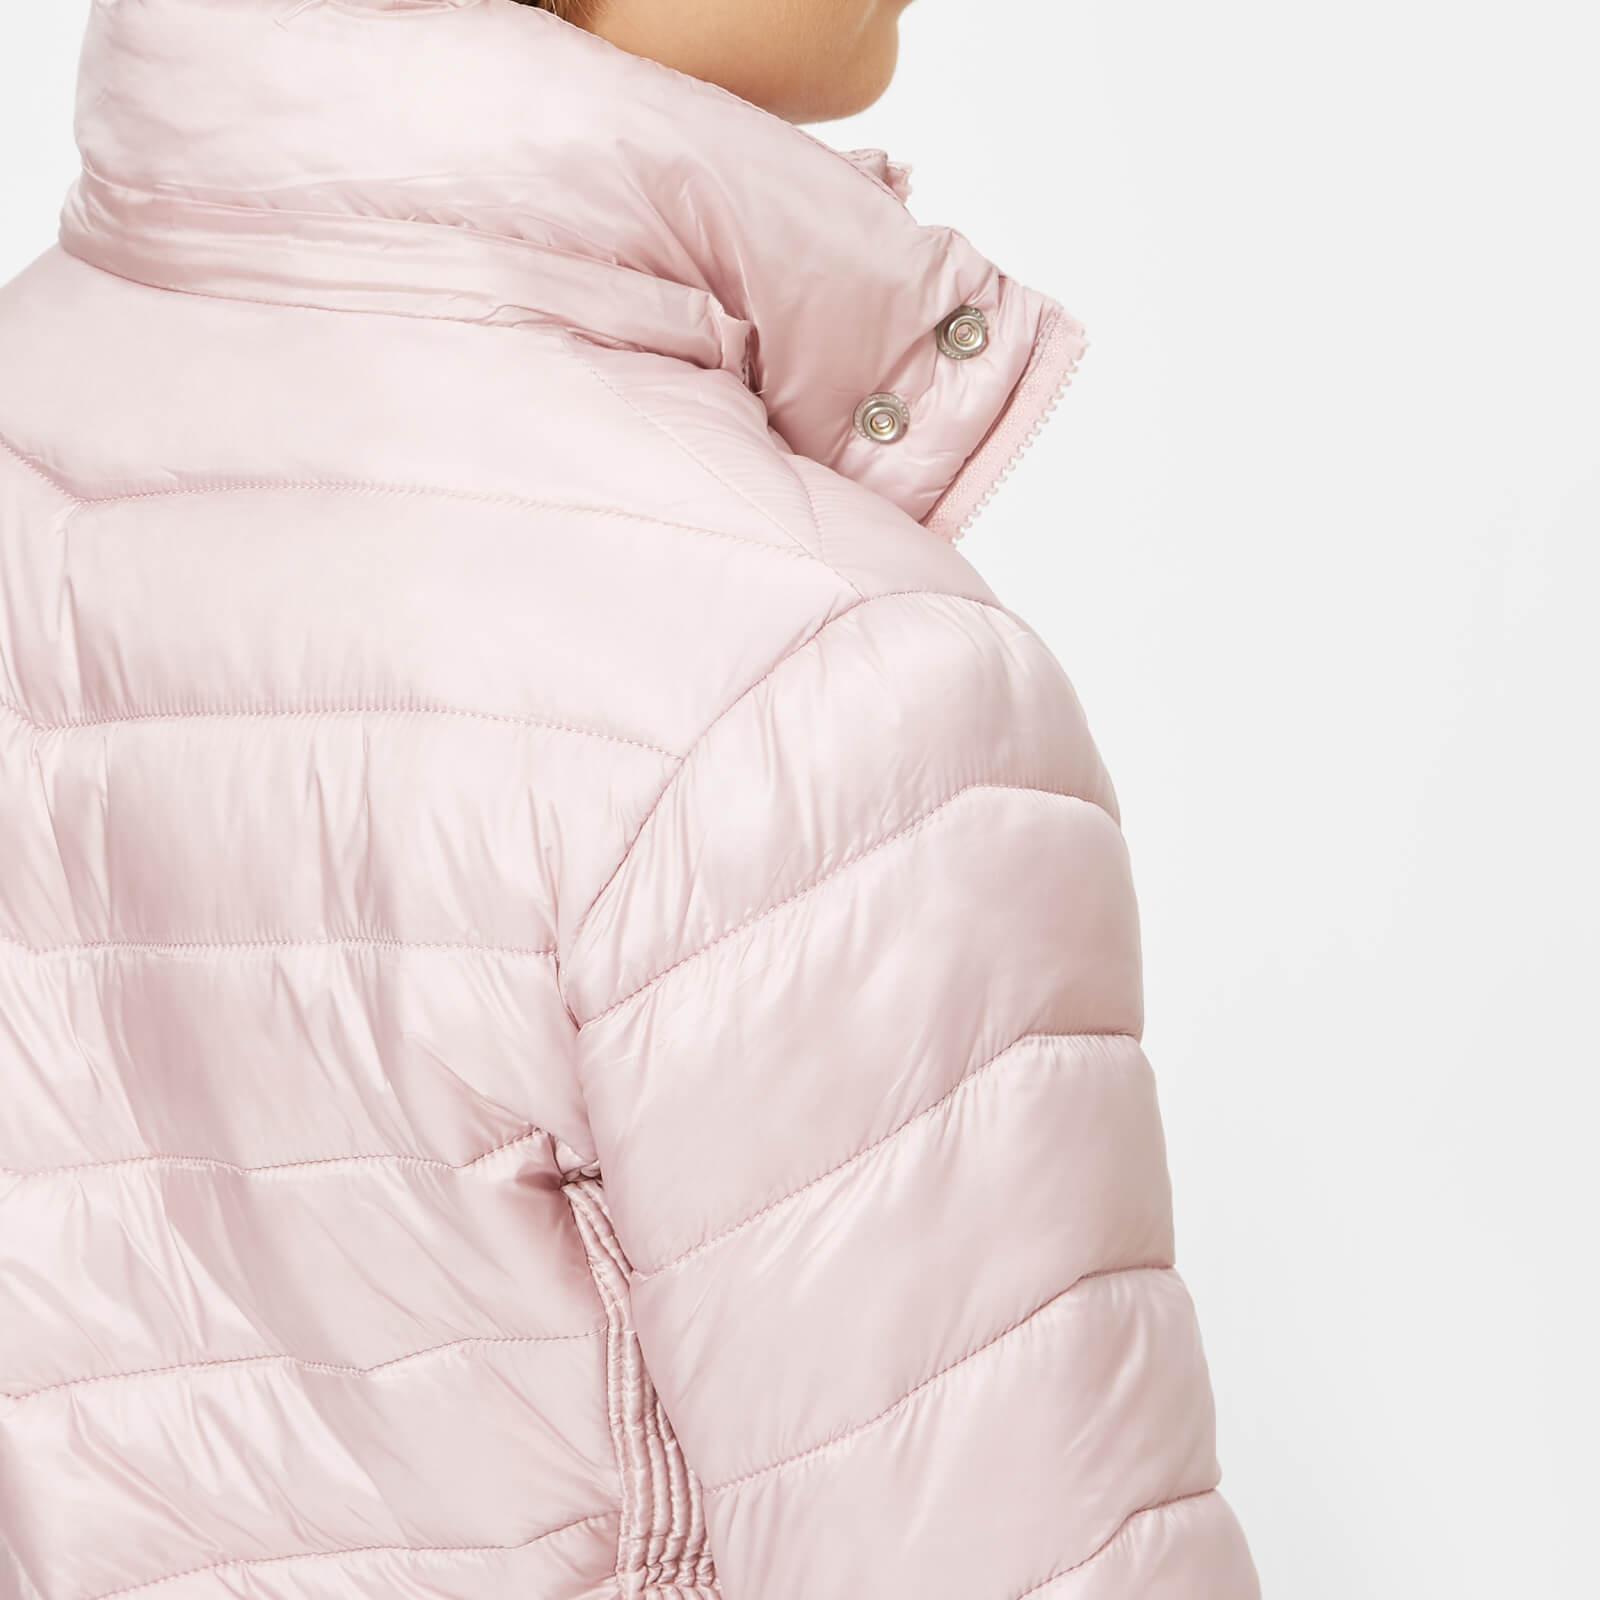 Superdry Hooded Luxe Chevron Fuji Jacket in Pink - Lyst